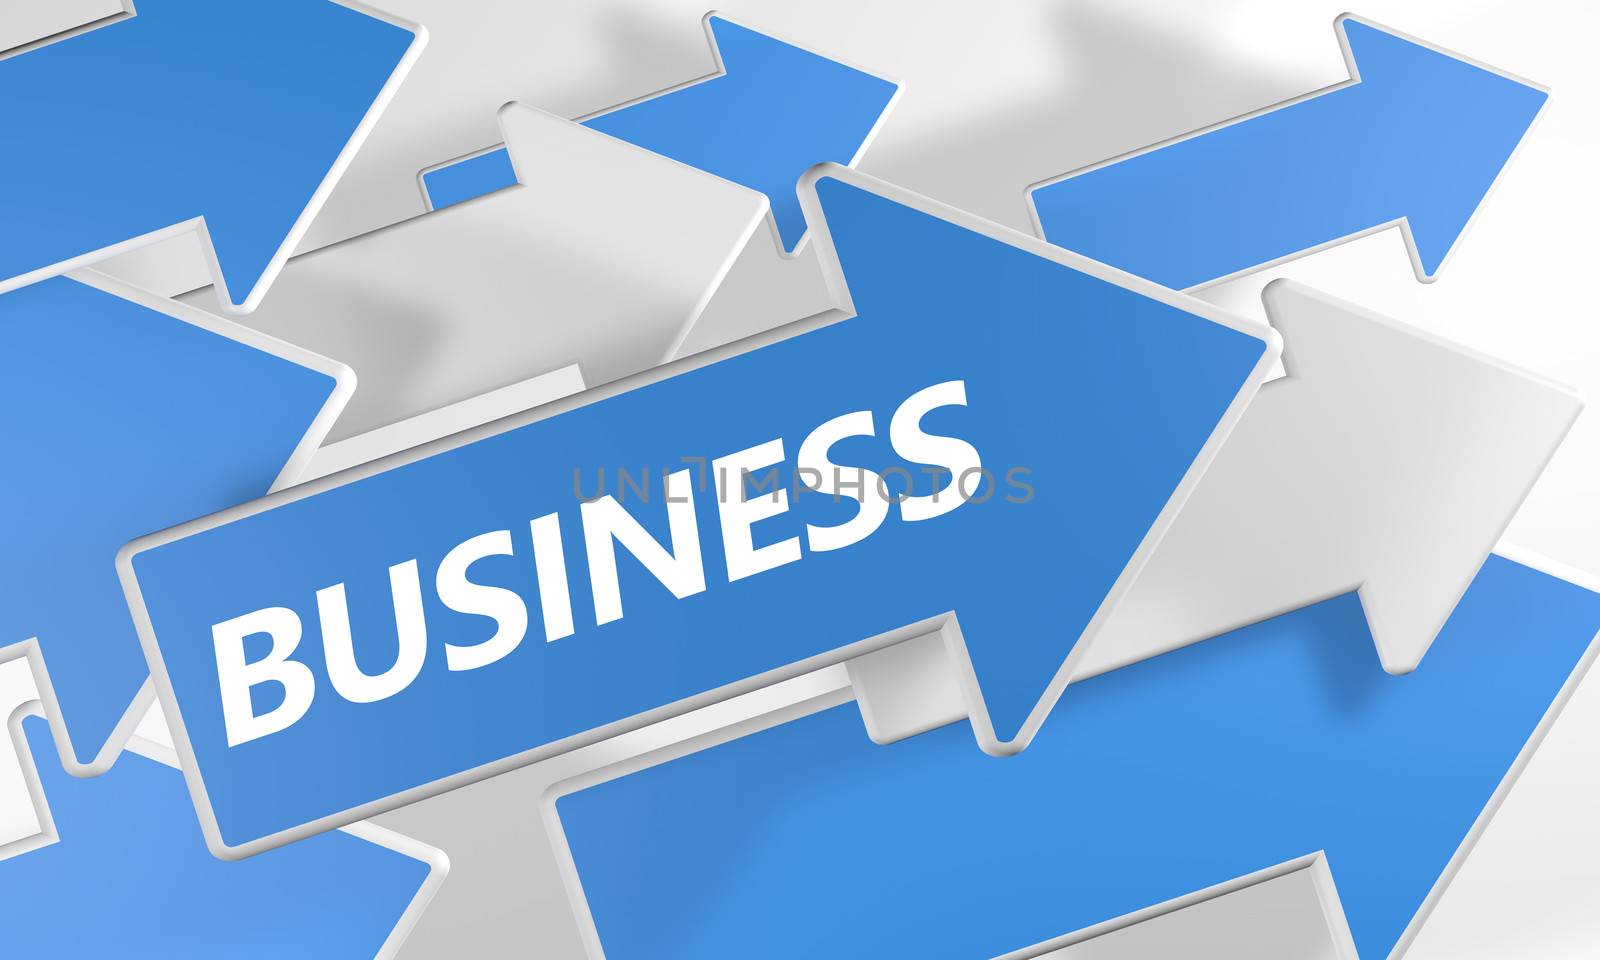 Business 3d render concept with blue and white arrows flying over a white background.